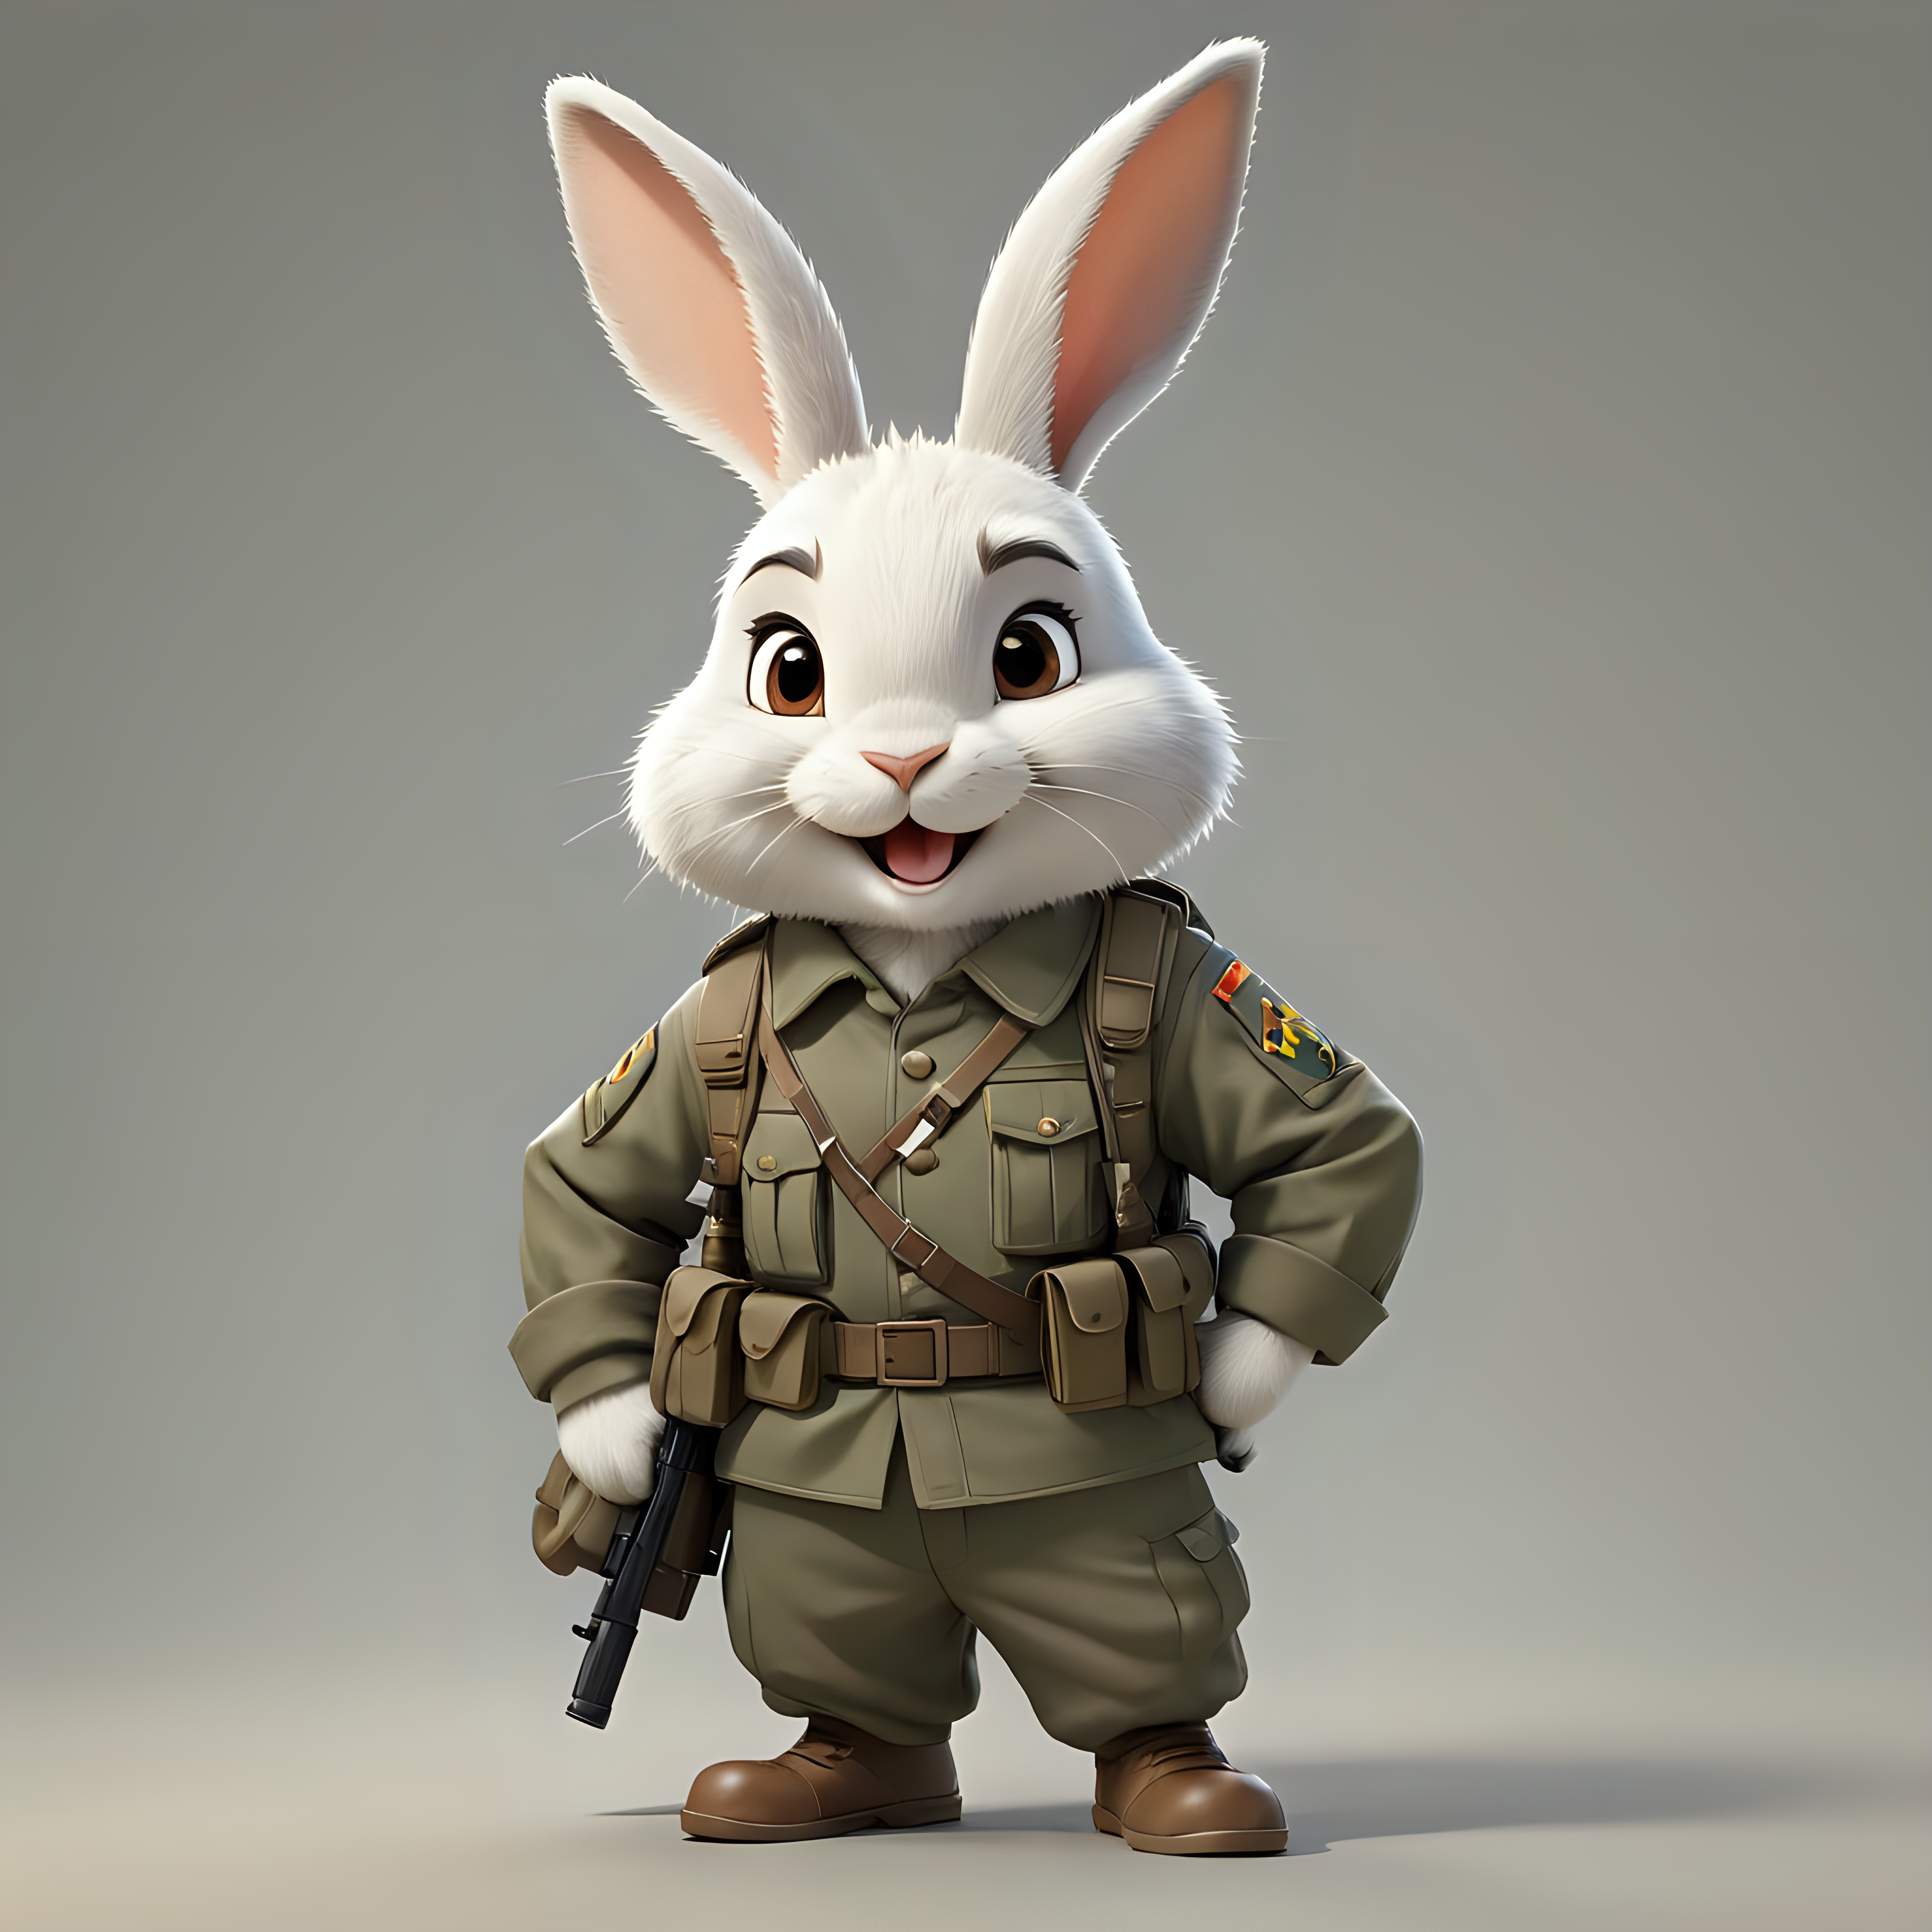 Cheerful Cartoon Rabbit Dressed as a Soldier